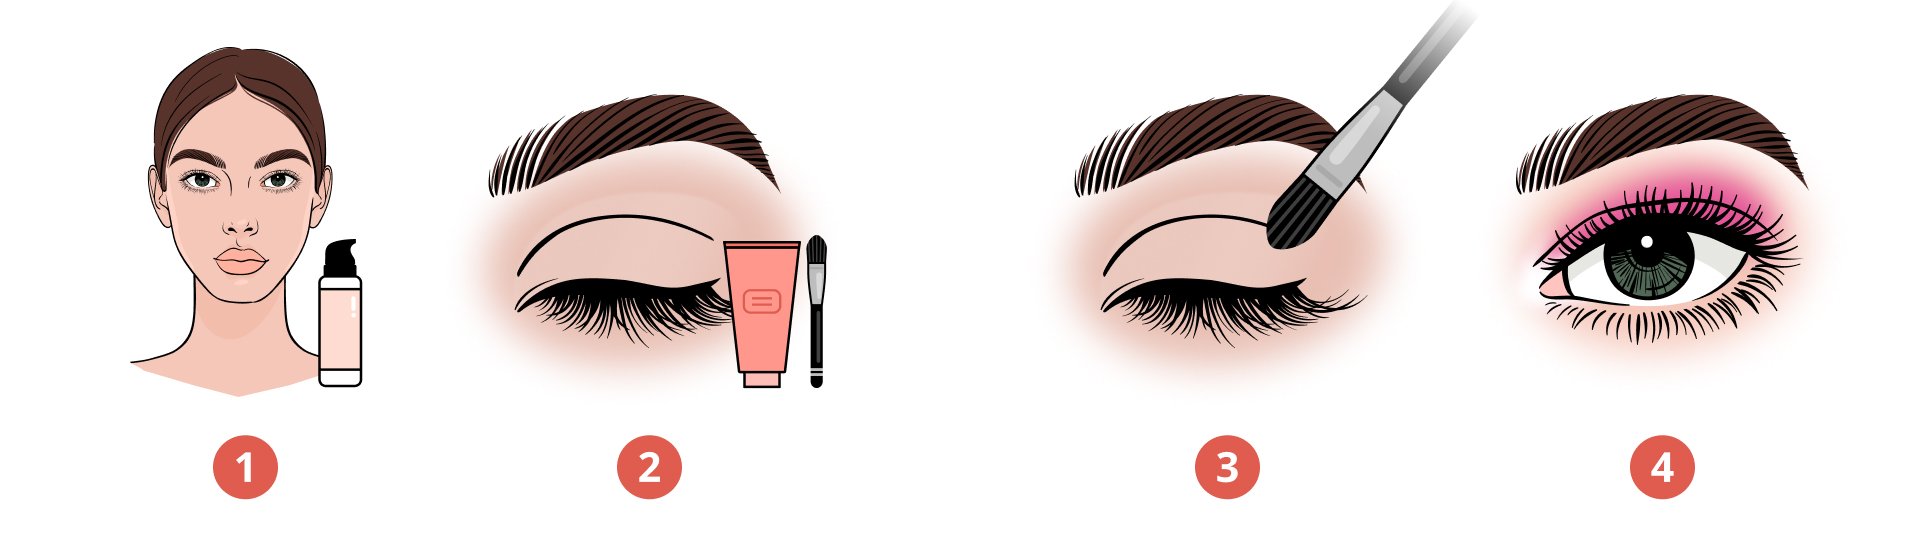 How to Apply Eyeshadow like a Pro: From Everyday to Glam with